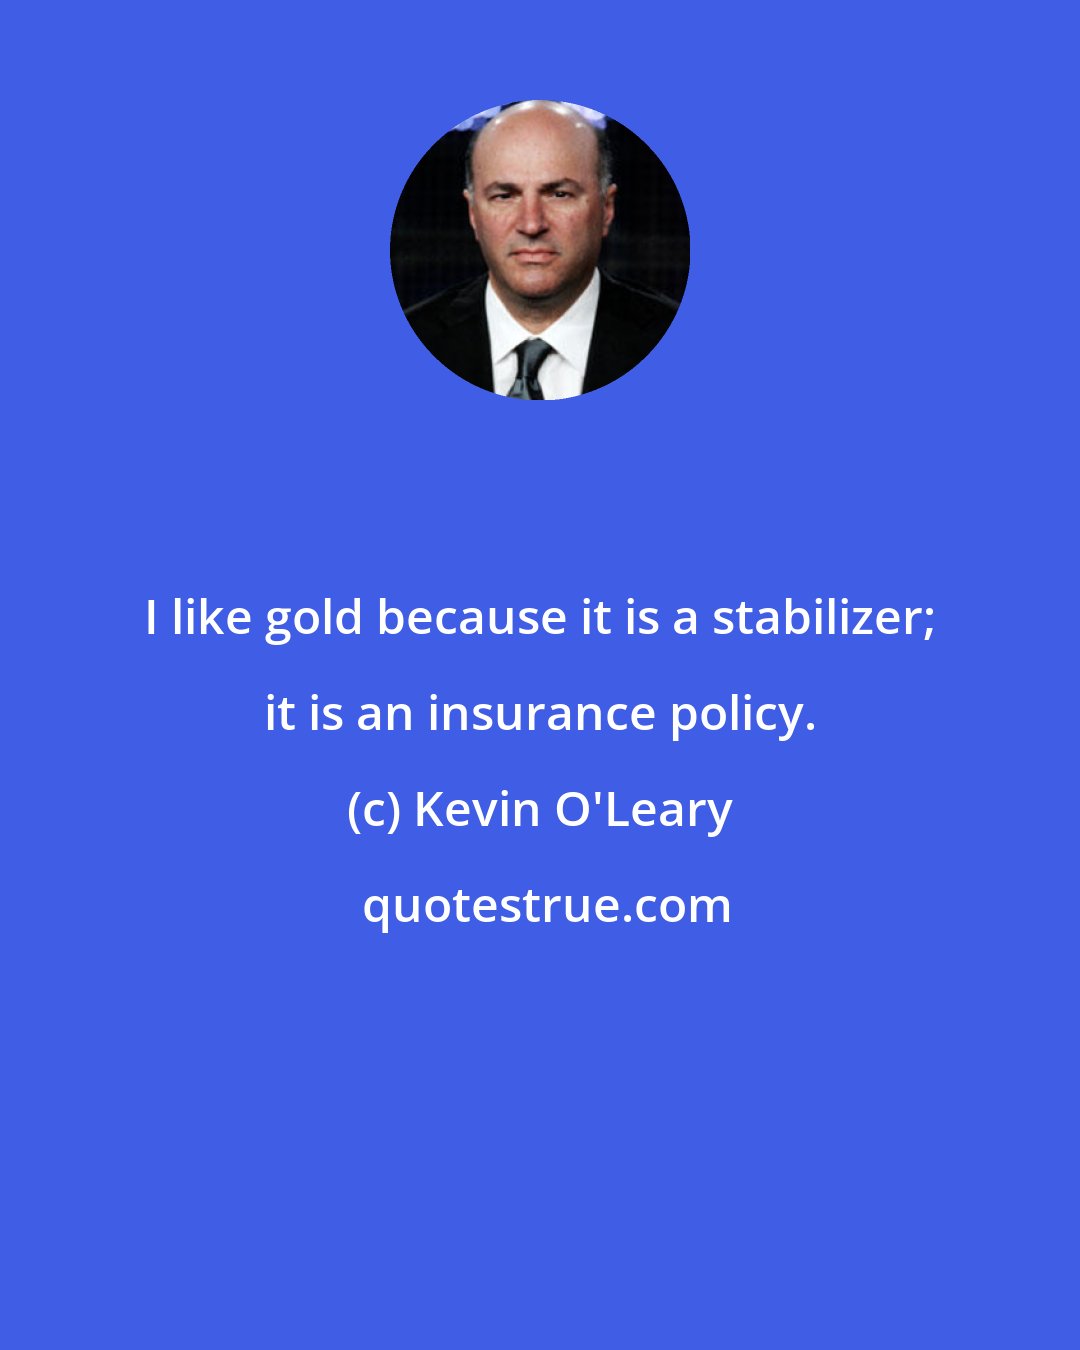 Kevin O'Leary: I like gold because it is a stabilizer; it is an insurance policy.